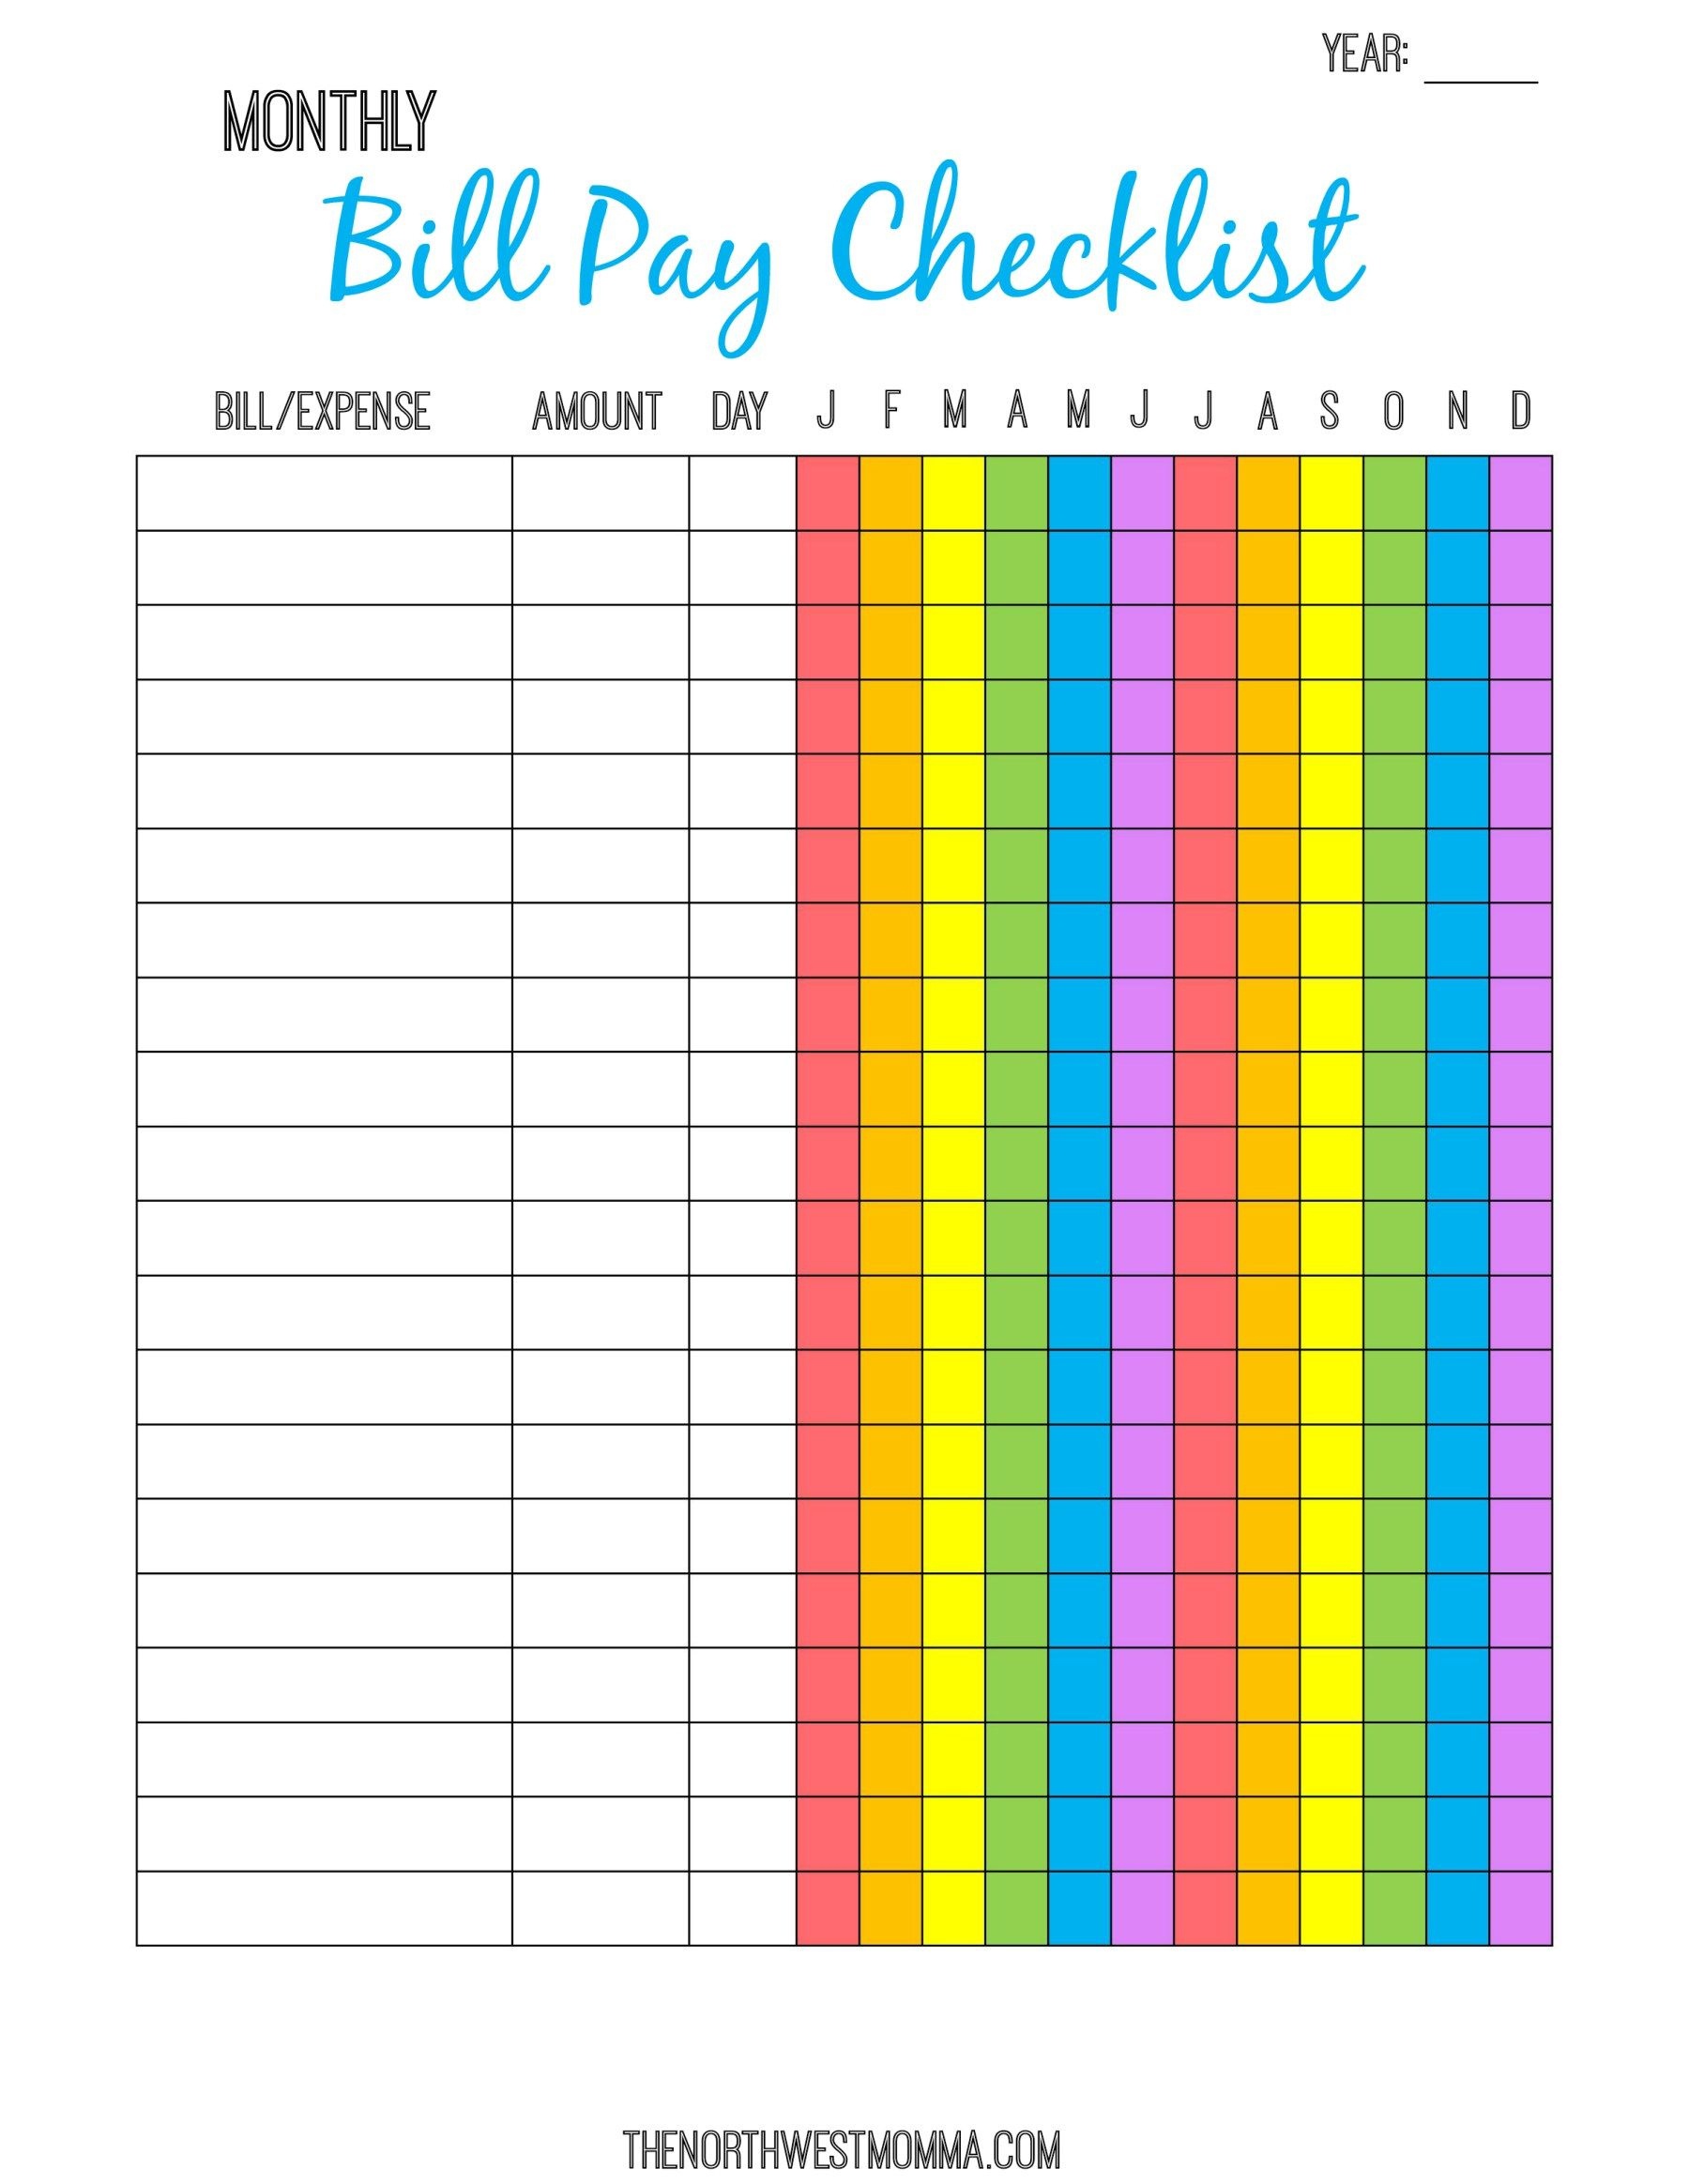 Monthly Bill Pay Checklist- Free Printable! | $ Saving Money - Free Printable Bill Payment Checklist